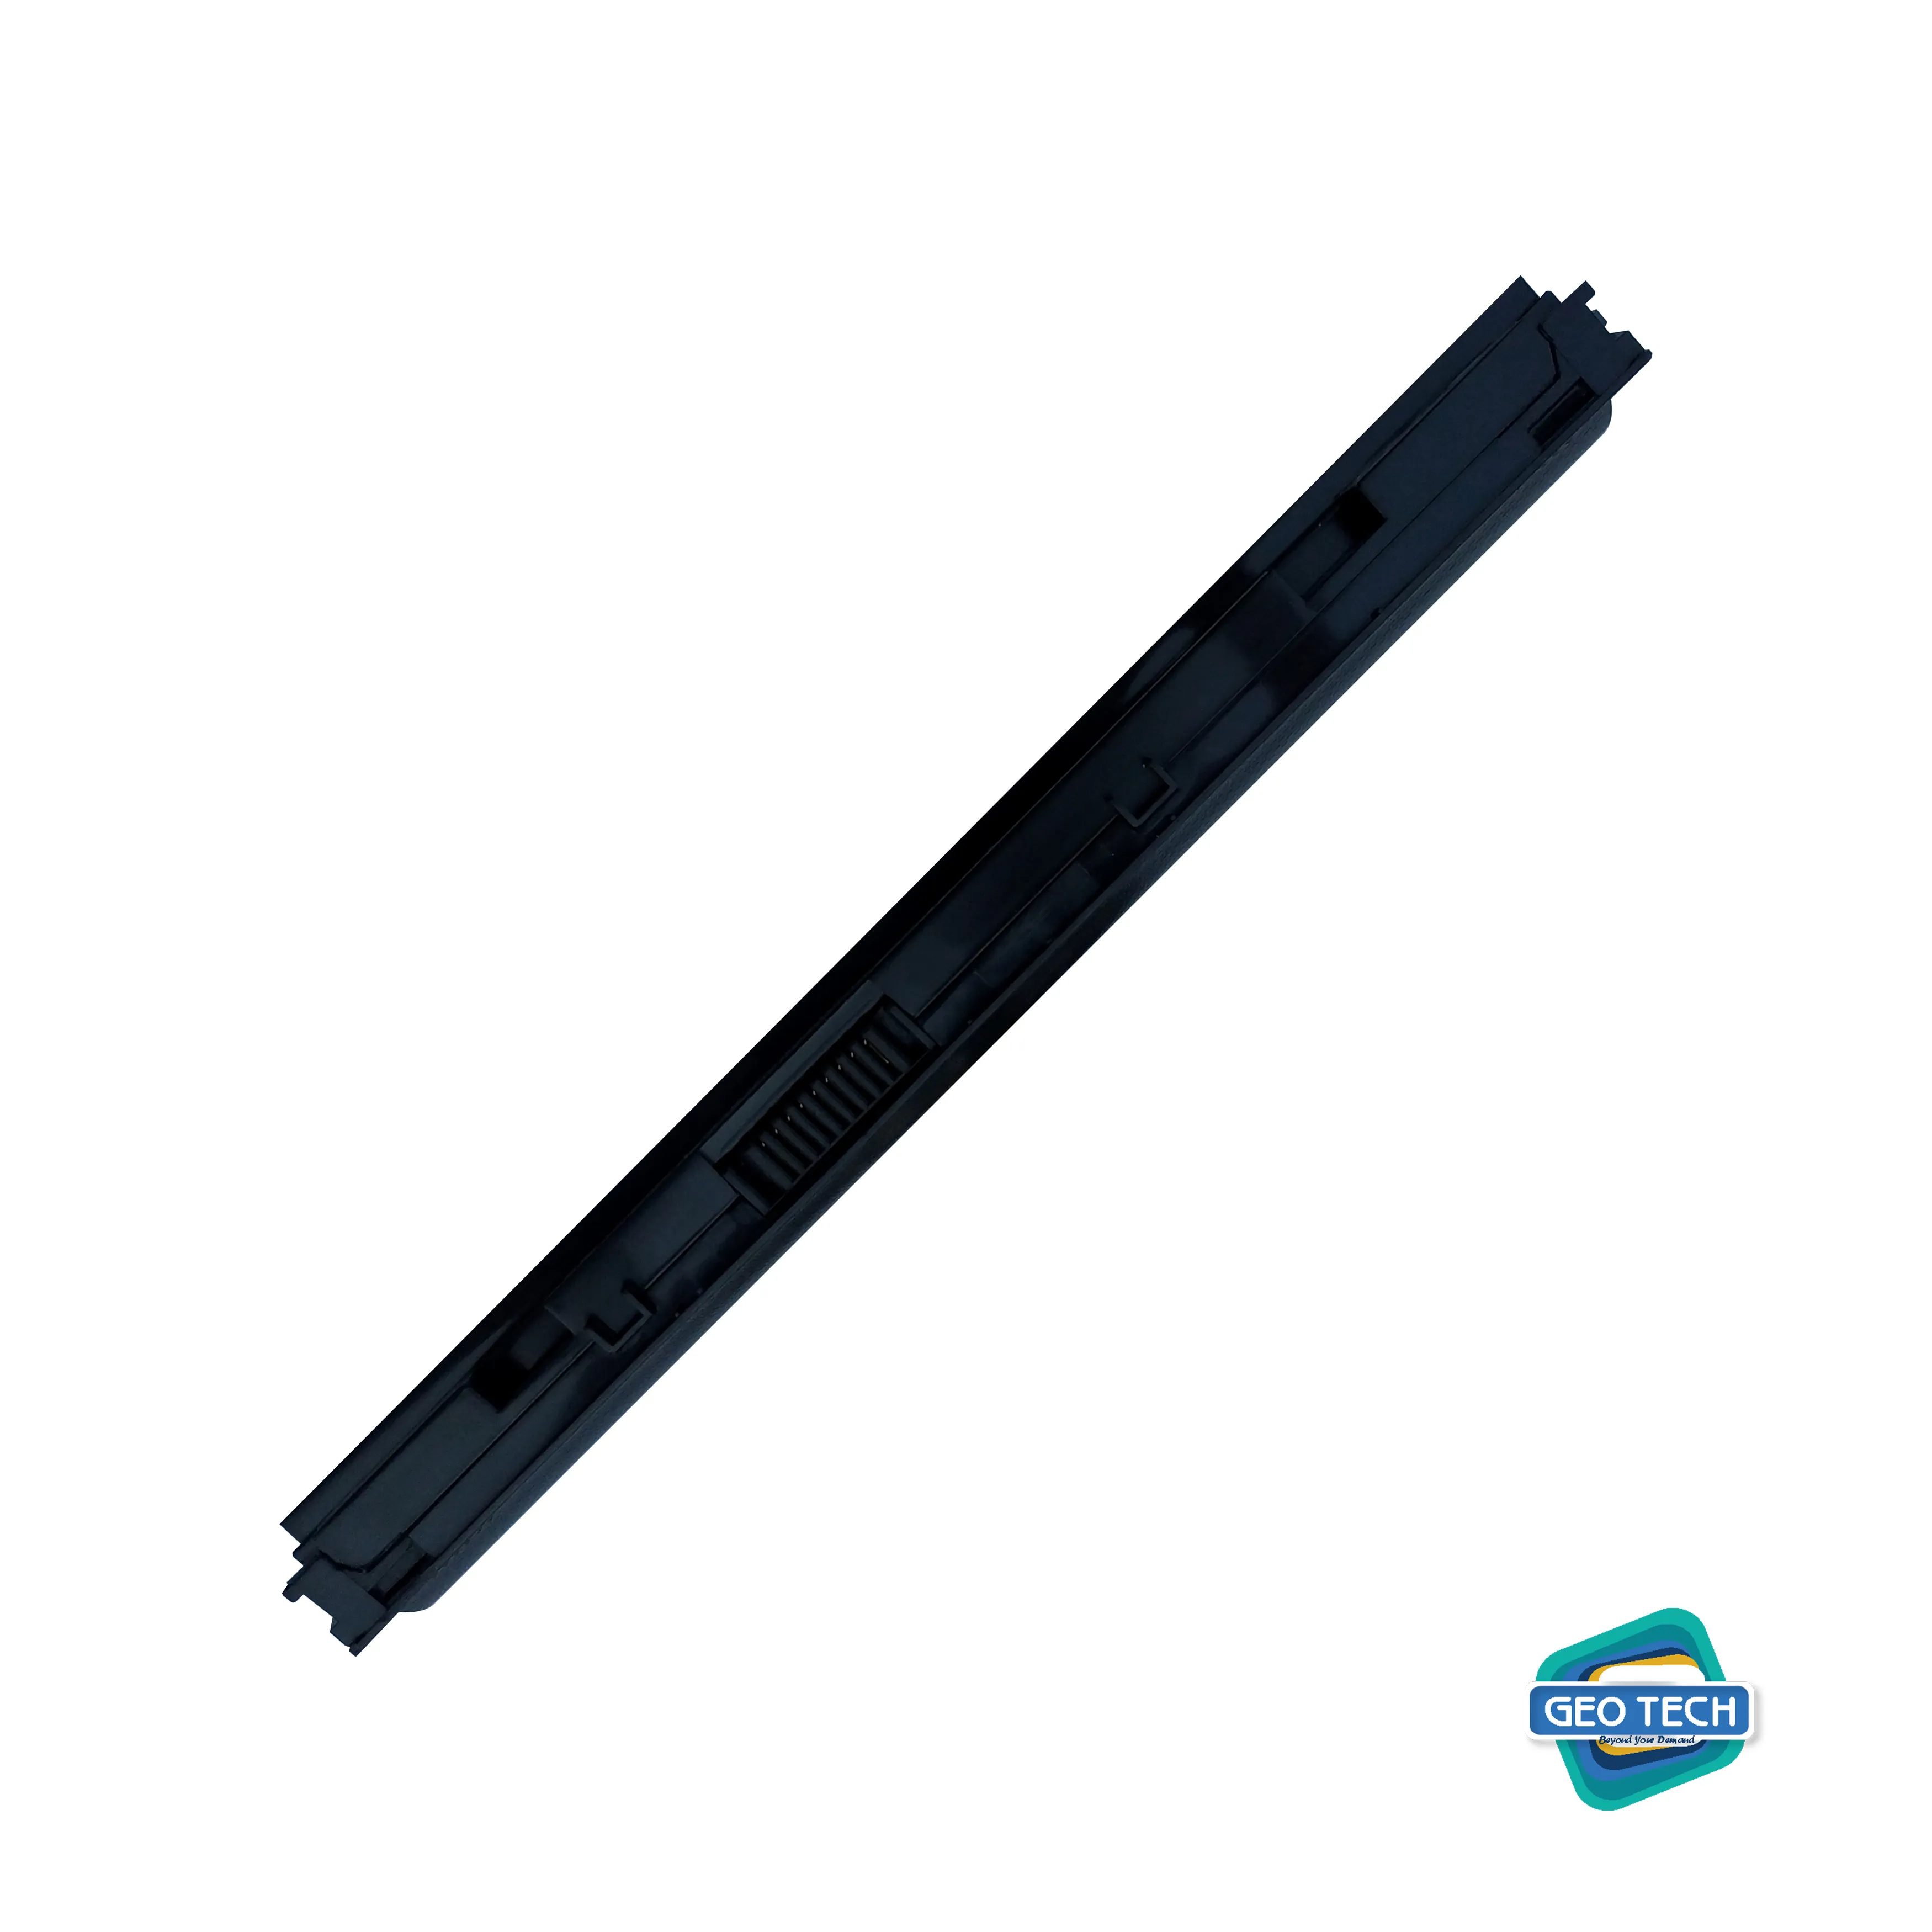 Laptop Battery Asus X101ch/ ASUS Eee PC X101, Eee PC X101C, Eee PC X101CH, Eee PC X101H Part NO 0B110-00100000M-A1A1A-213-AJ1B, 0B20-013K0AS, A31-X101 BATTERY